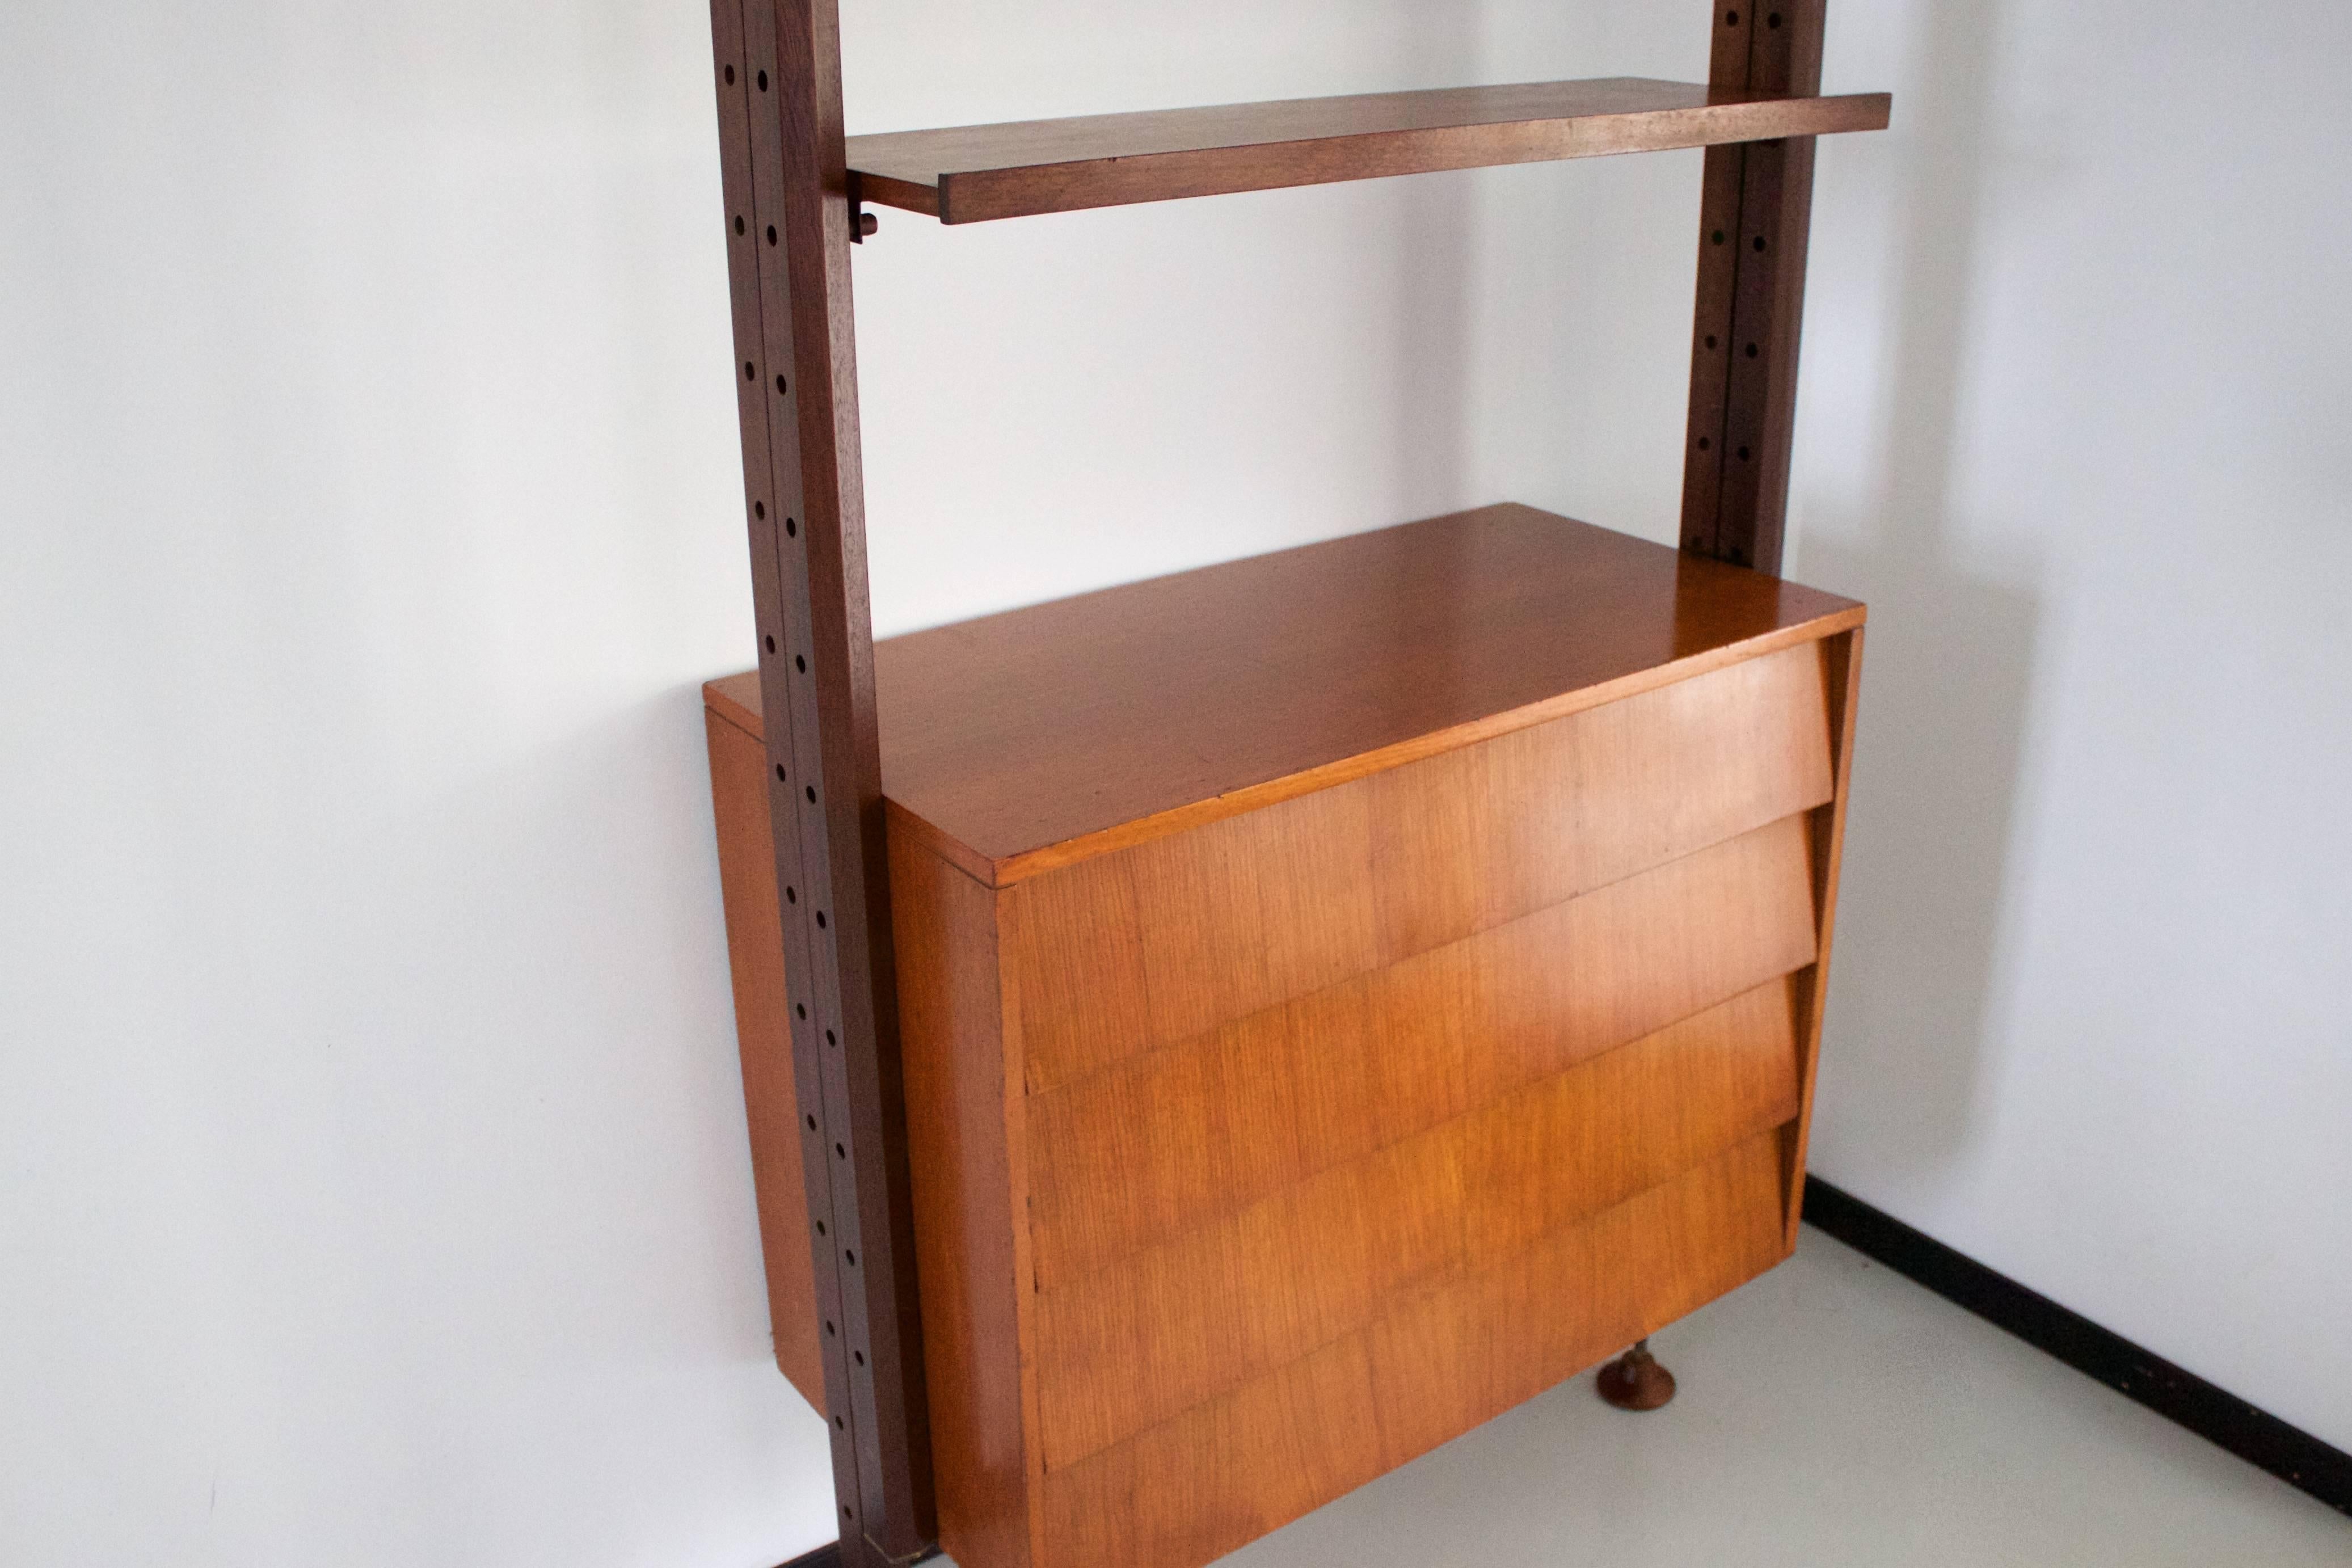 Impressive wooden ISA wall unit in very good condition.

It consists of four teak shelves, a cheerywood chest of drawers and two teak stands. 

The solid teak stands are adjustable in height up til 440 cm. (173 Inch) 

The unit comes with four